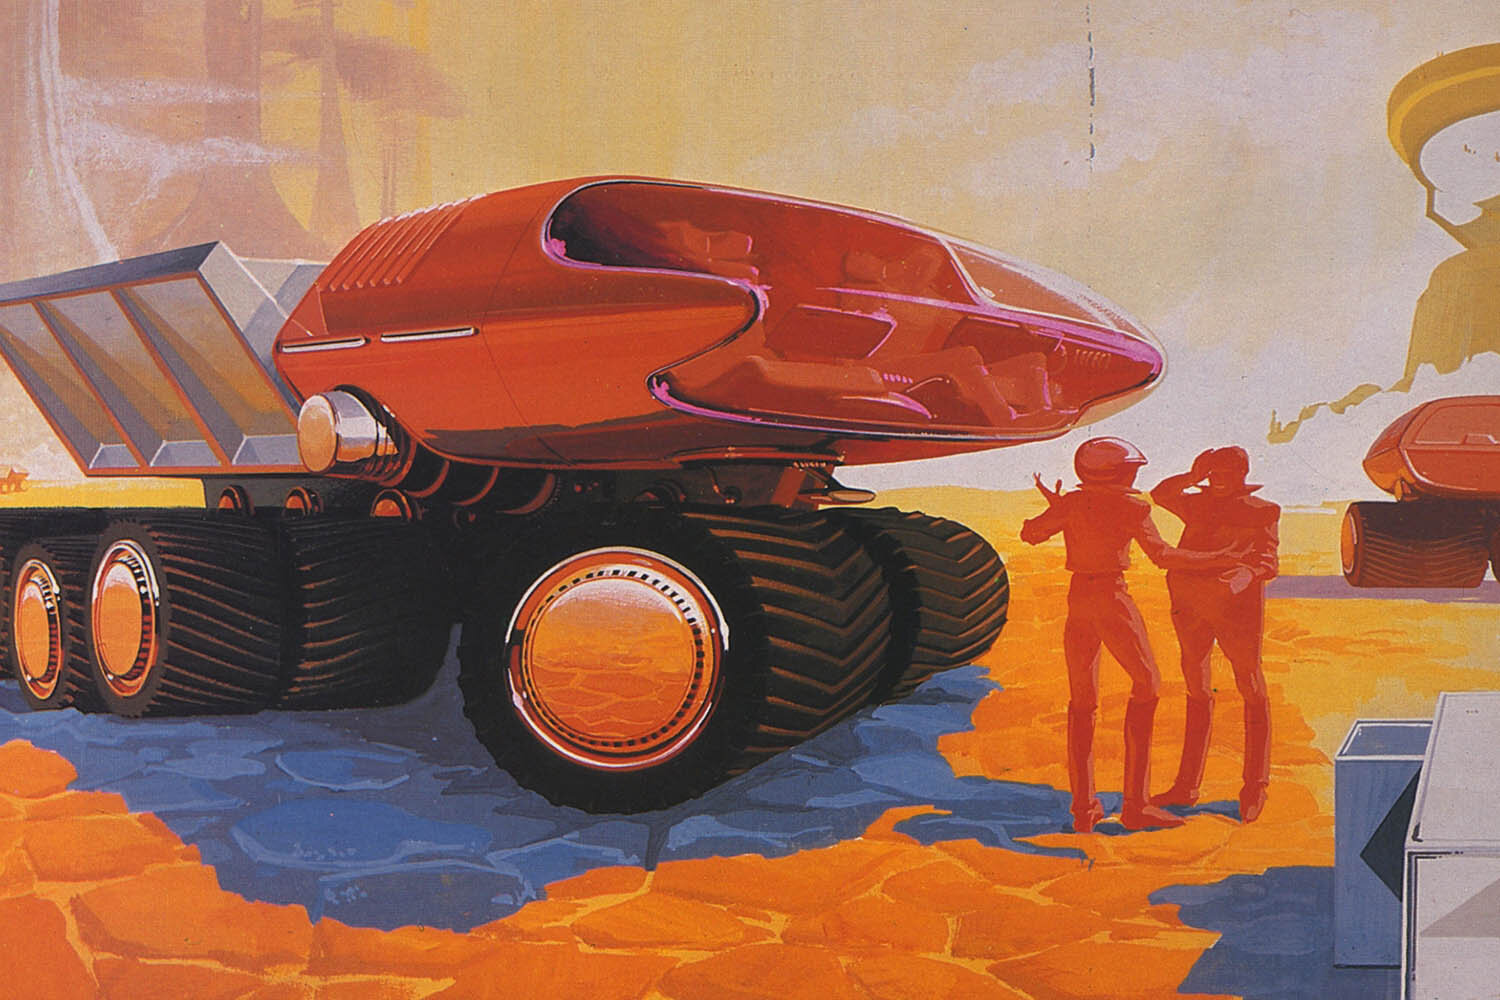 Syd_Mead_USSteel_Concepts_1961_Future_Heavy_Transport.jpg